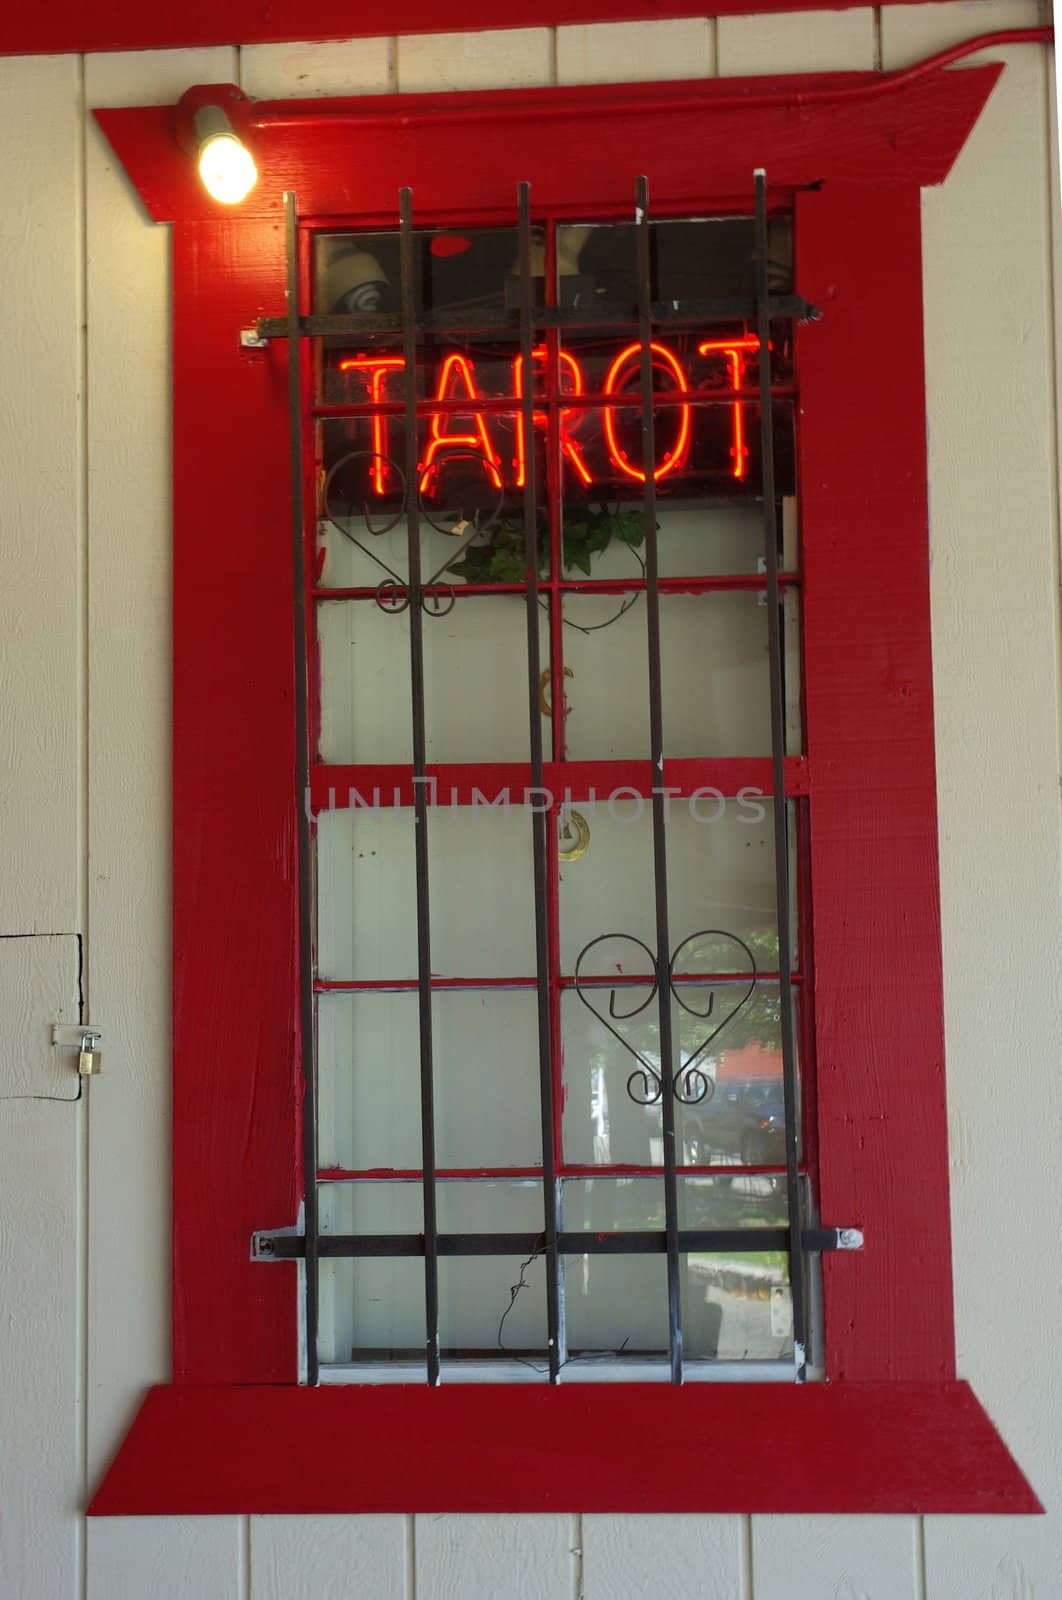 Tarot card reading sign advertising in a building window.